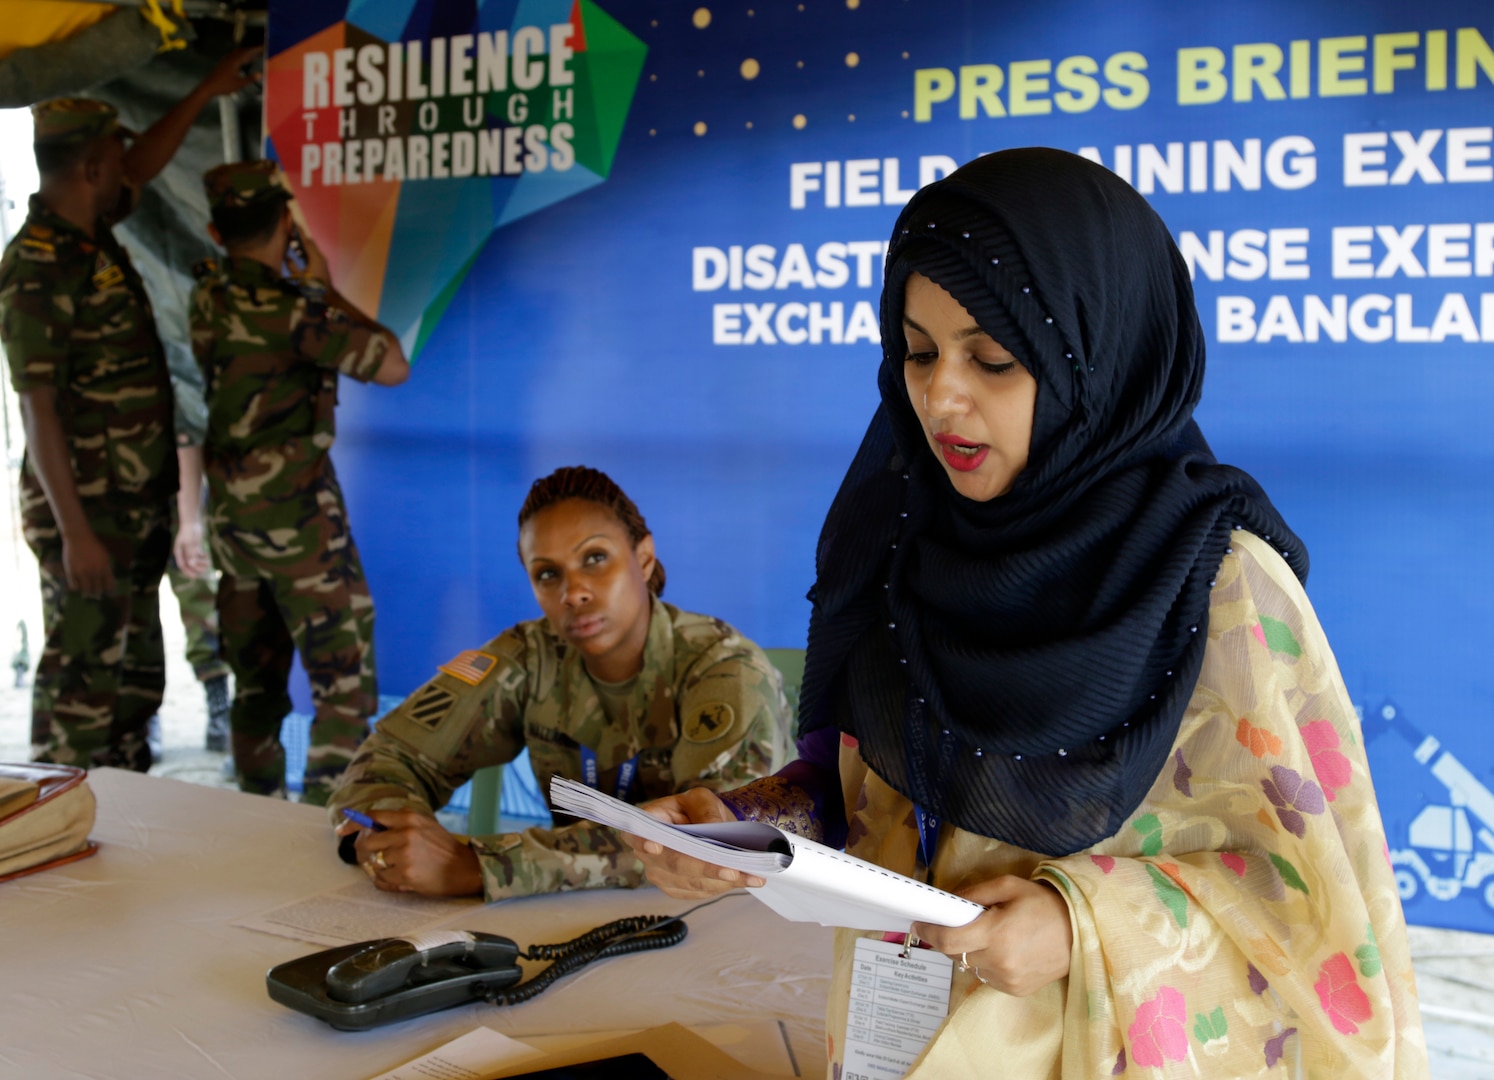 Representatives from multiple countries, agencies and non-government agencies practice crisis communication during the Bangladesh Disaster Response Exercise and Exchange (DREE) hosted by The Bangladesh Ministry of Disaster Management and Relief, Bangladesh Armed Forces Division, and the United States Army Pacific Oct. 29.